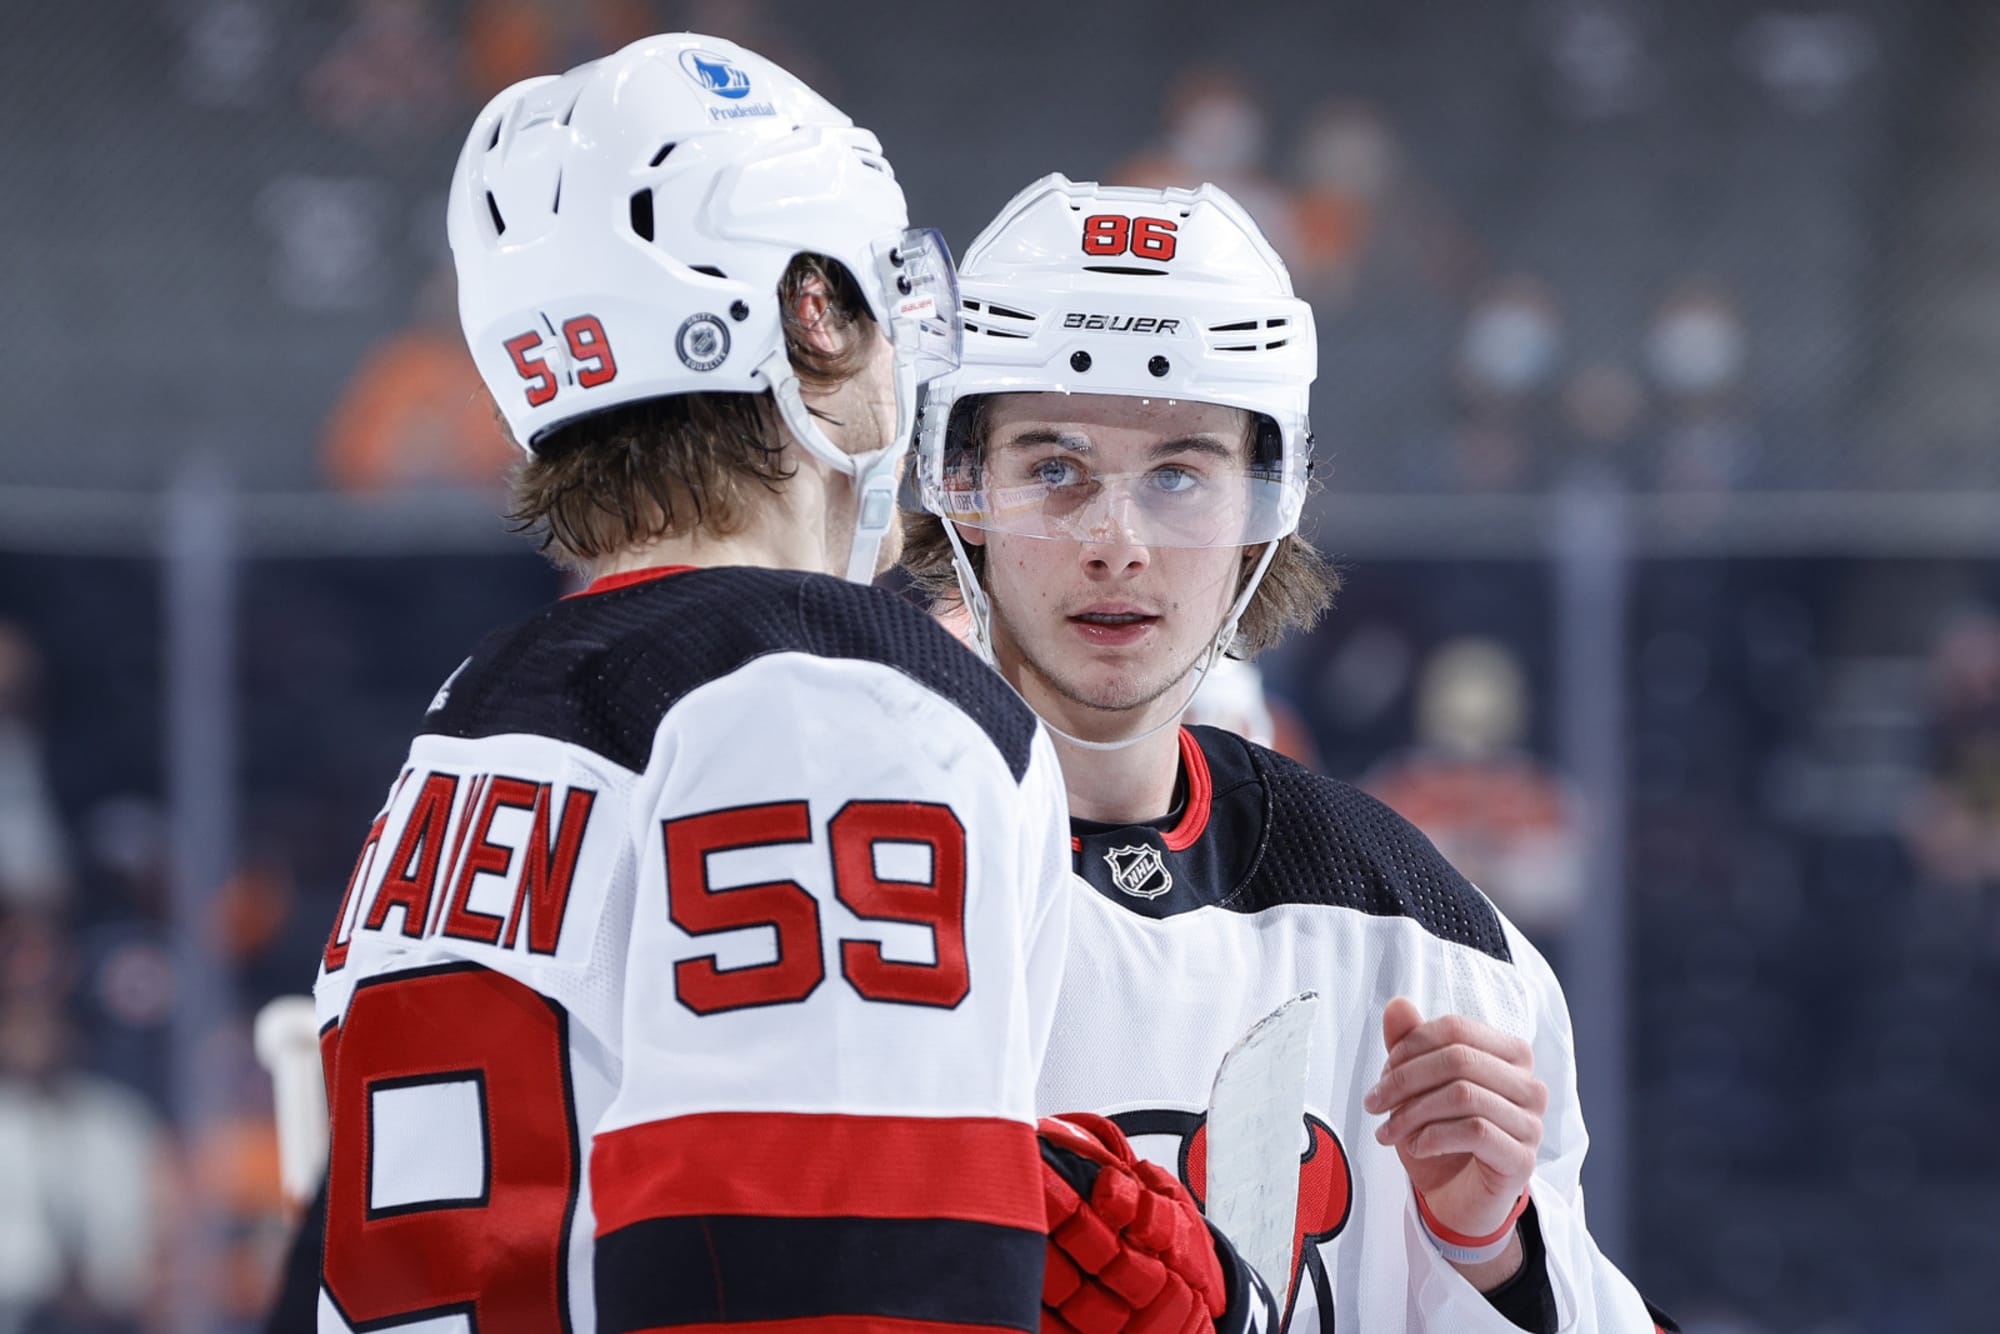 Other Jack Hughes Carving His Own Path in Hockey